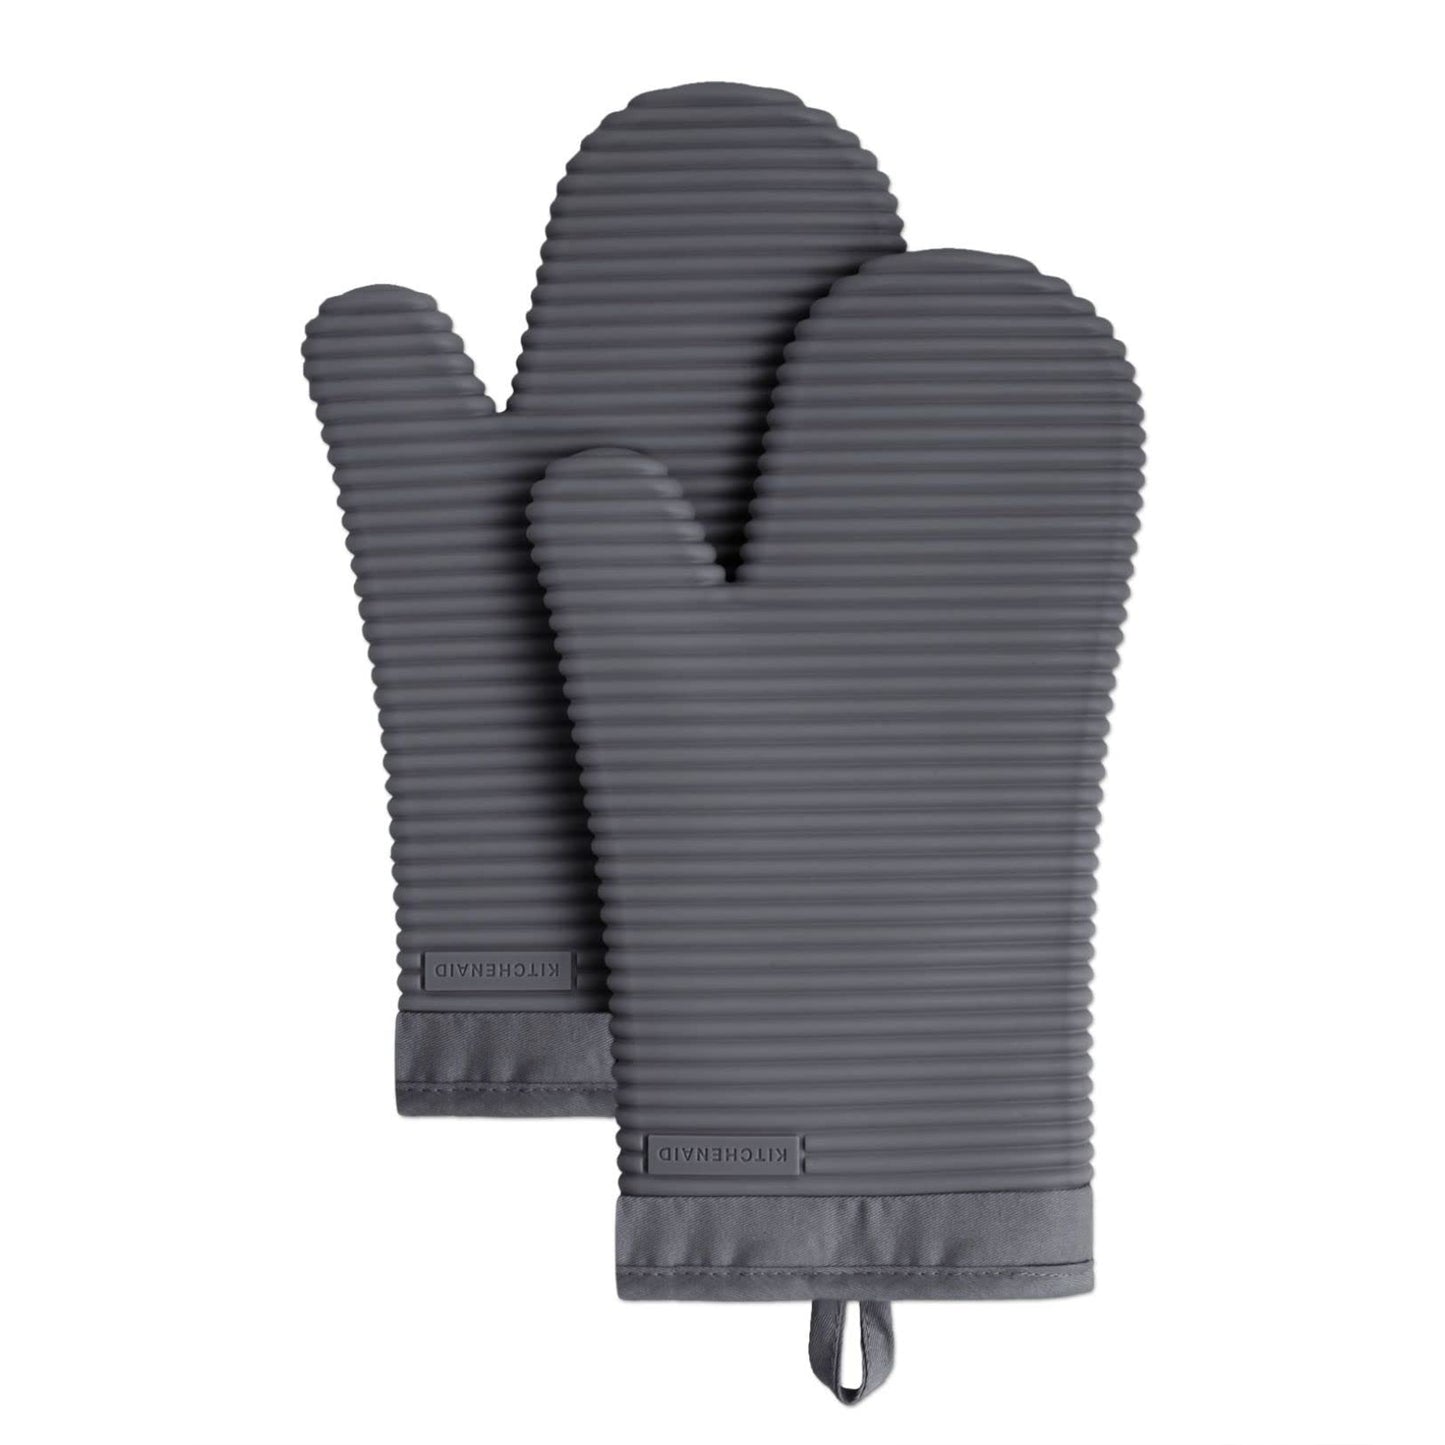 KitchenAid Ribbed Soft Silicone Oven Mitt Set, Charcoal Grey 2 Count , 7.5"x13"